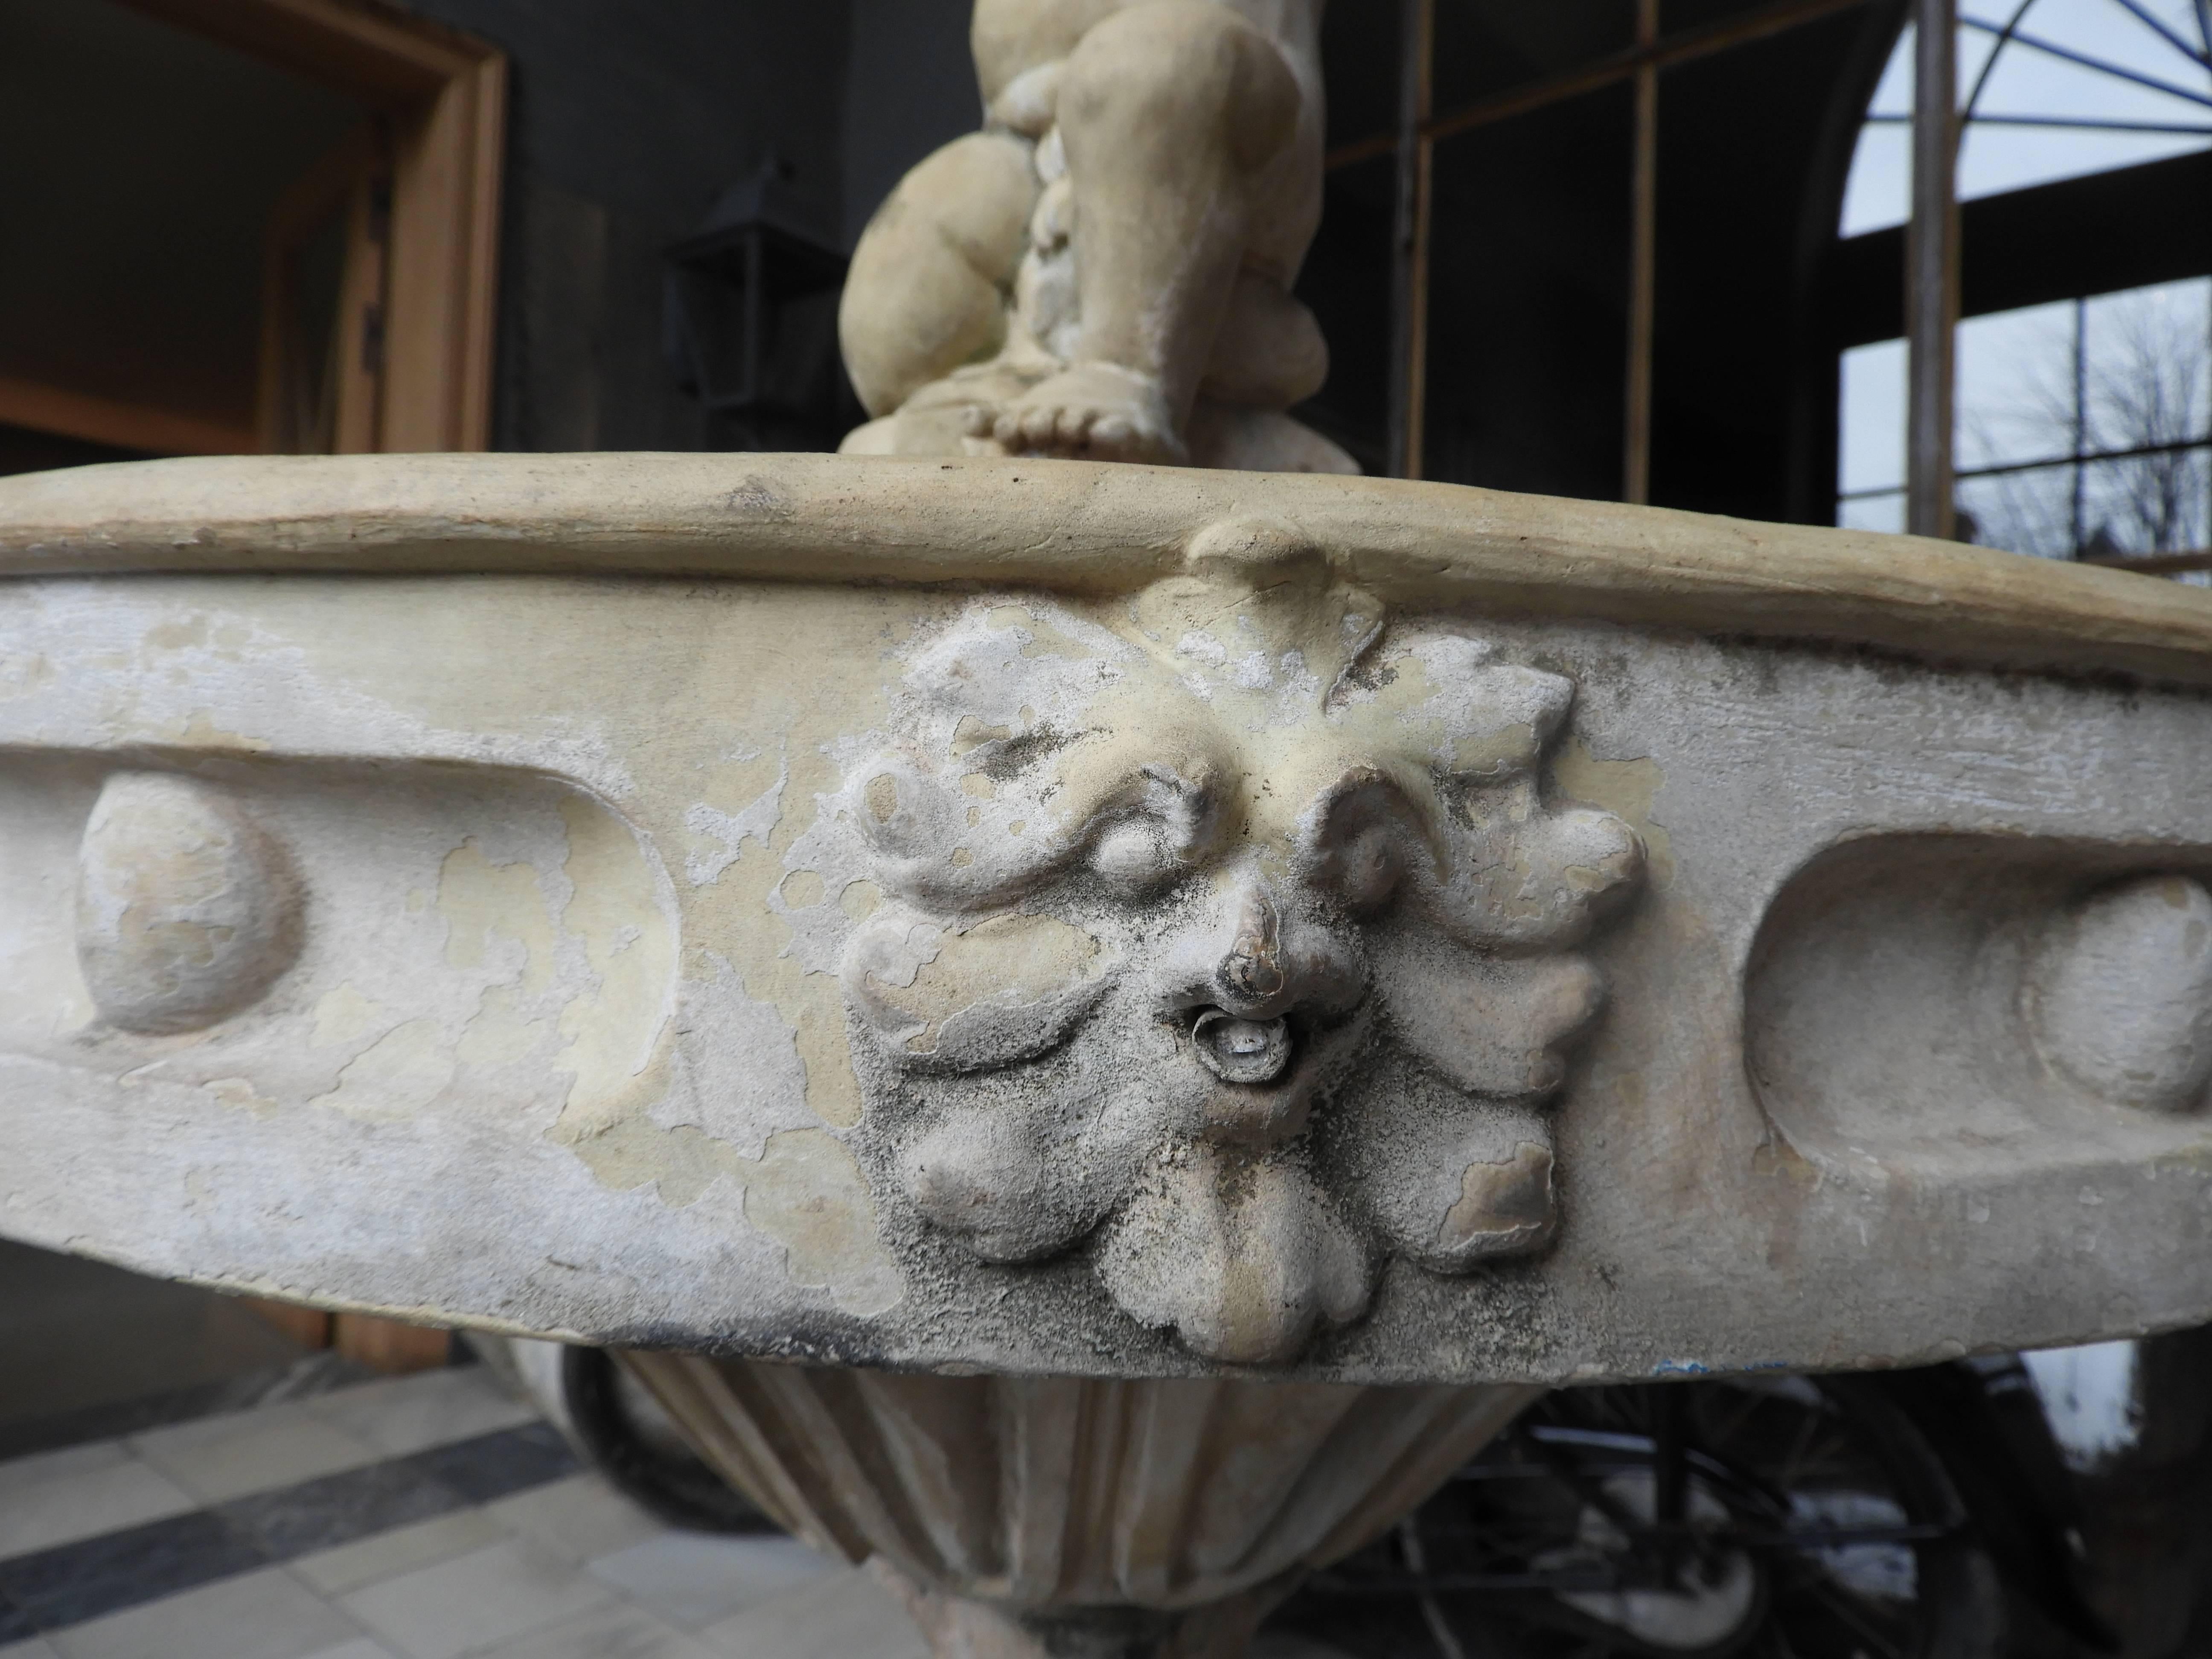 At least early 20 century terra cotta fountain. Spanish provenance and in very good condition.
I would advise inside use or use outside in areas where it doesn't freeze.